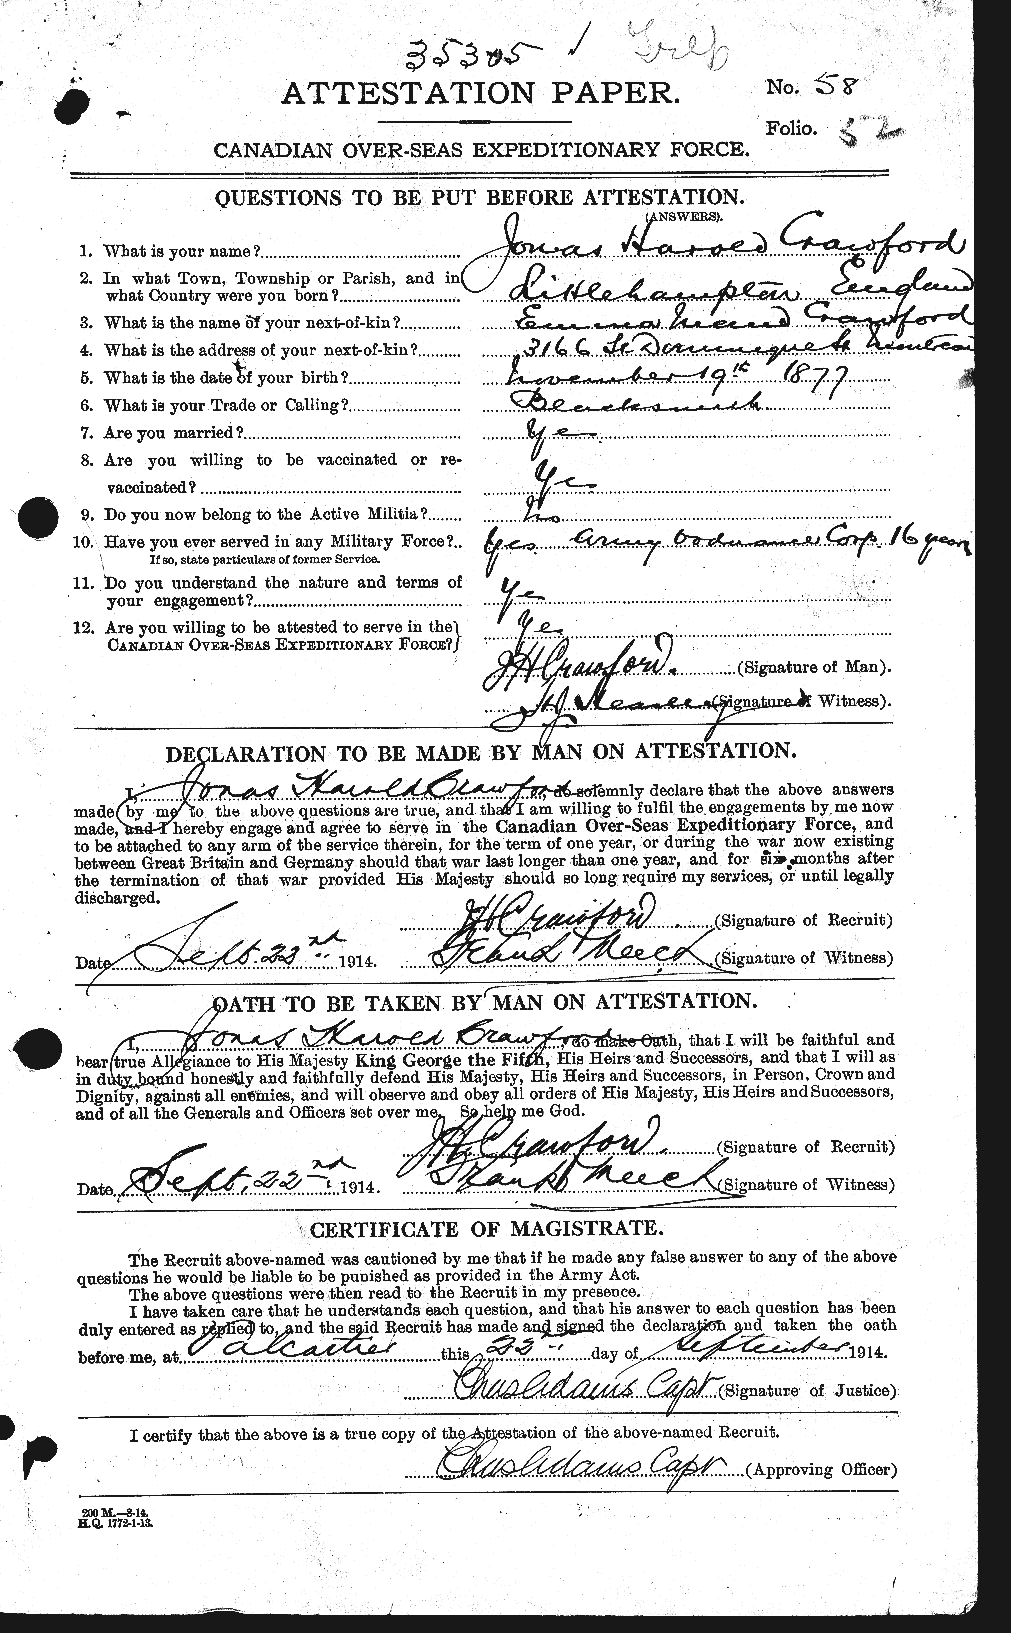 Personnel Records of the First World War - CEF 062426a